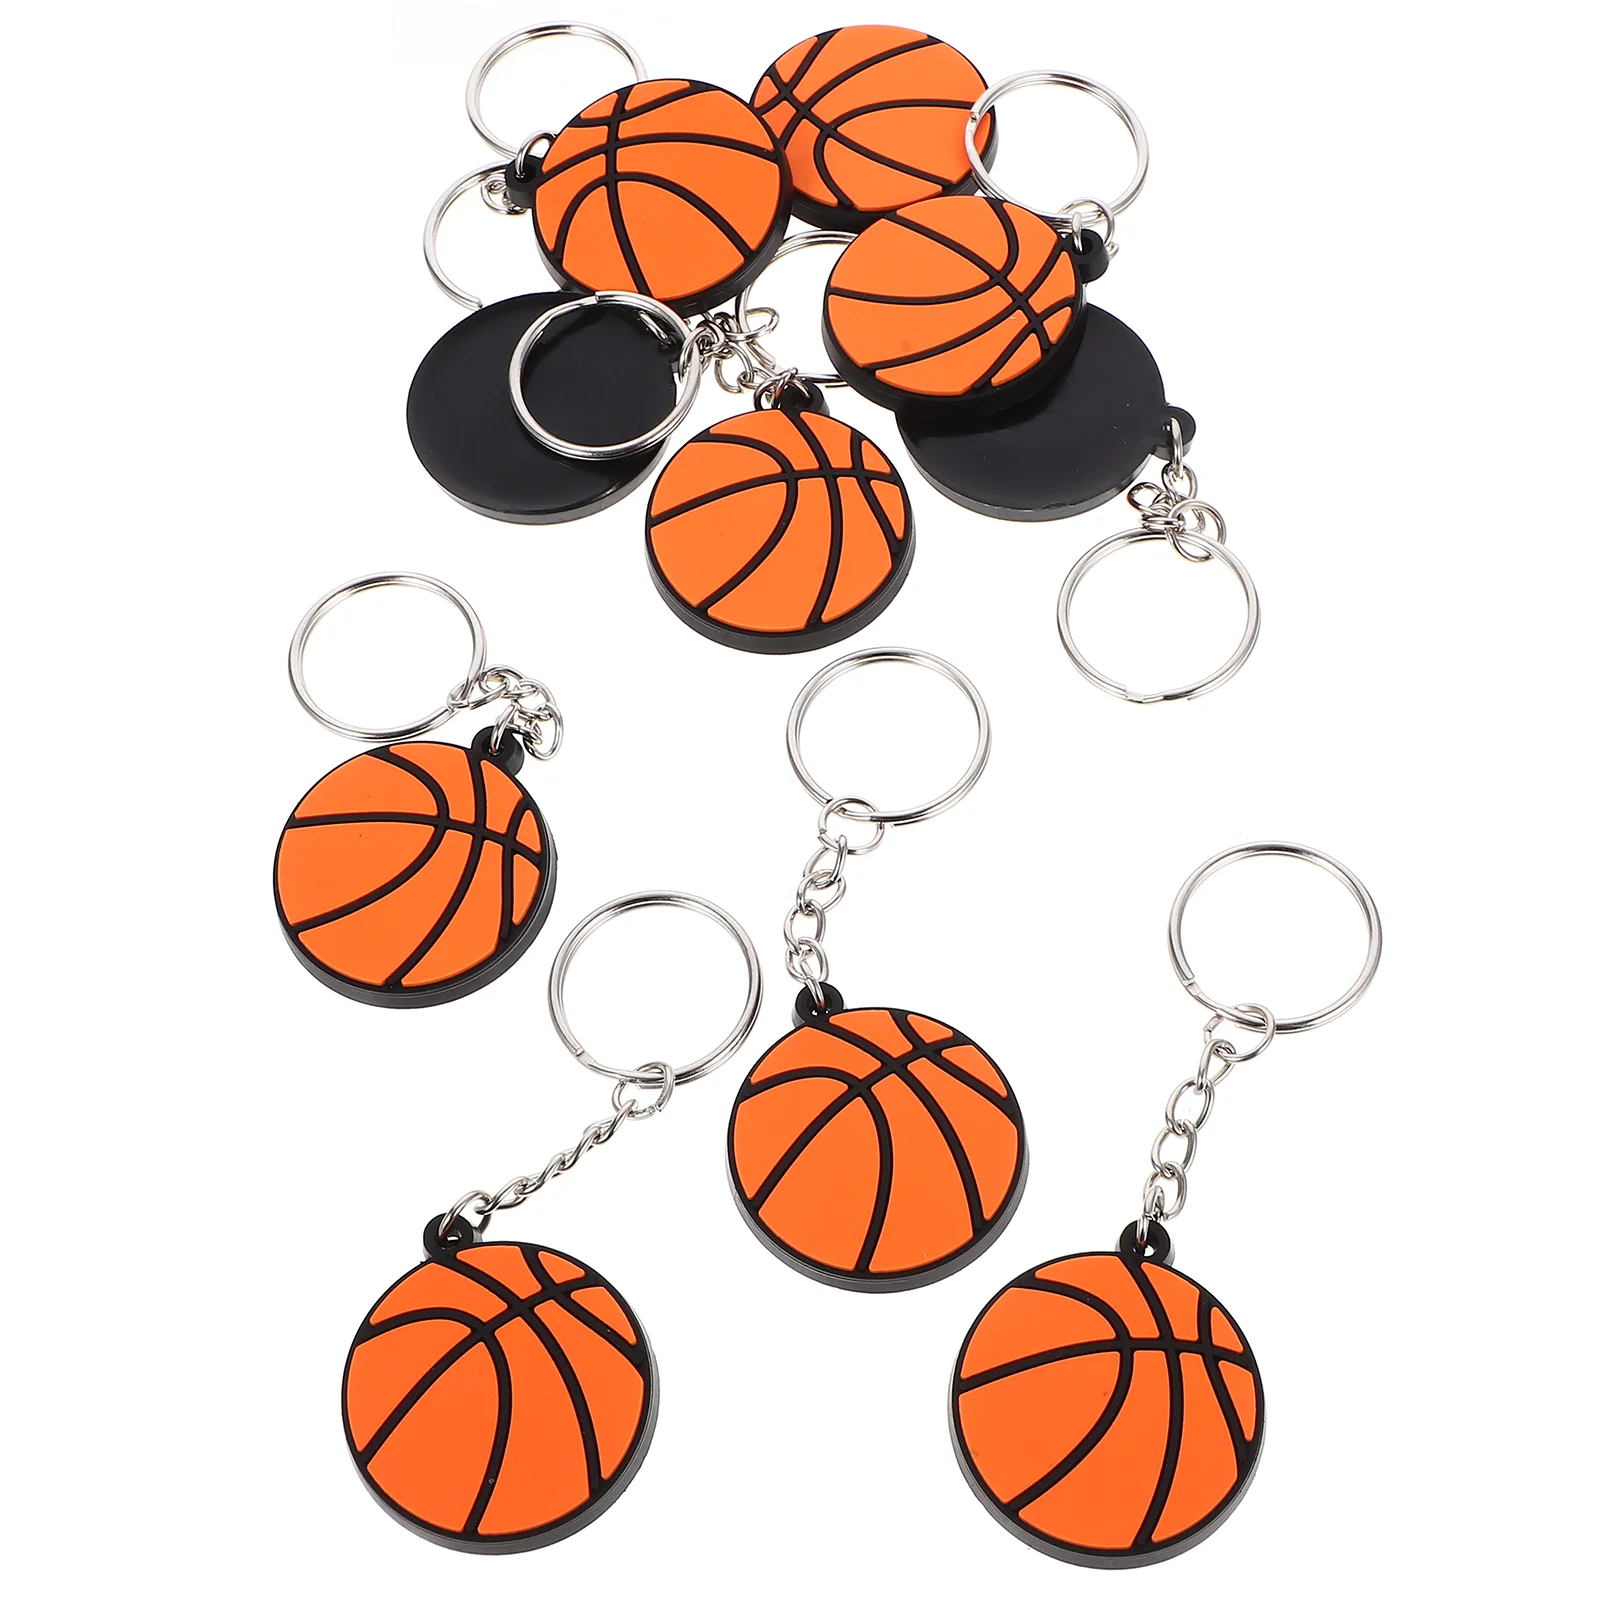 

Sports Ball Keyring Hanging Pendant Backpack Ornament Keychains for Bag Small Keyrings Decors Ornaments